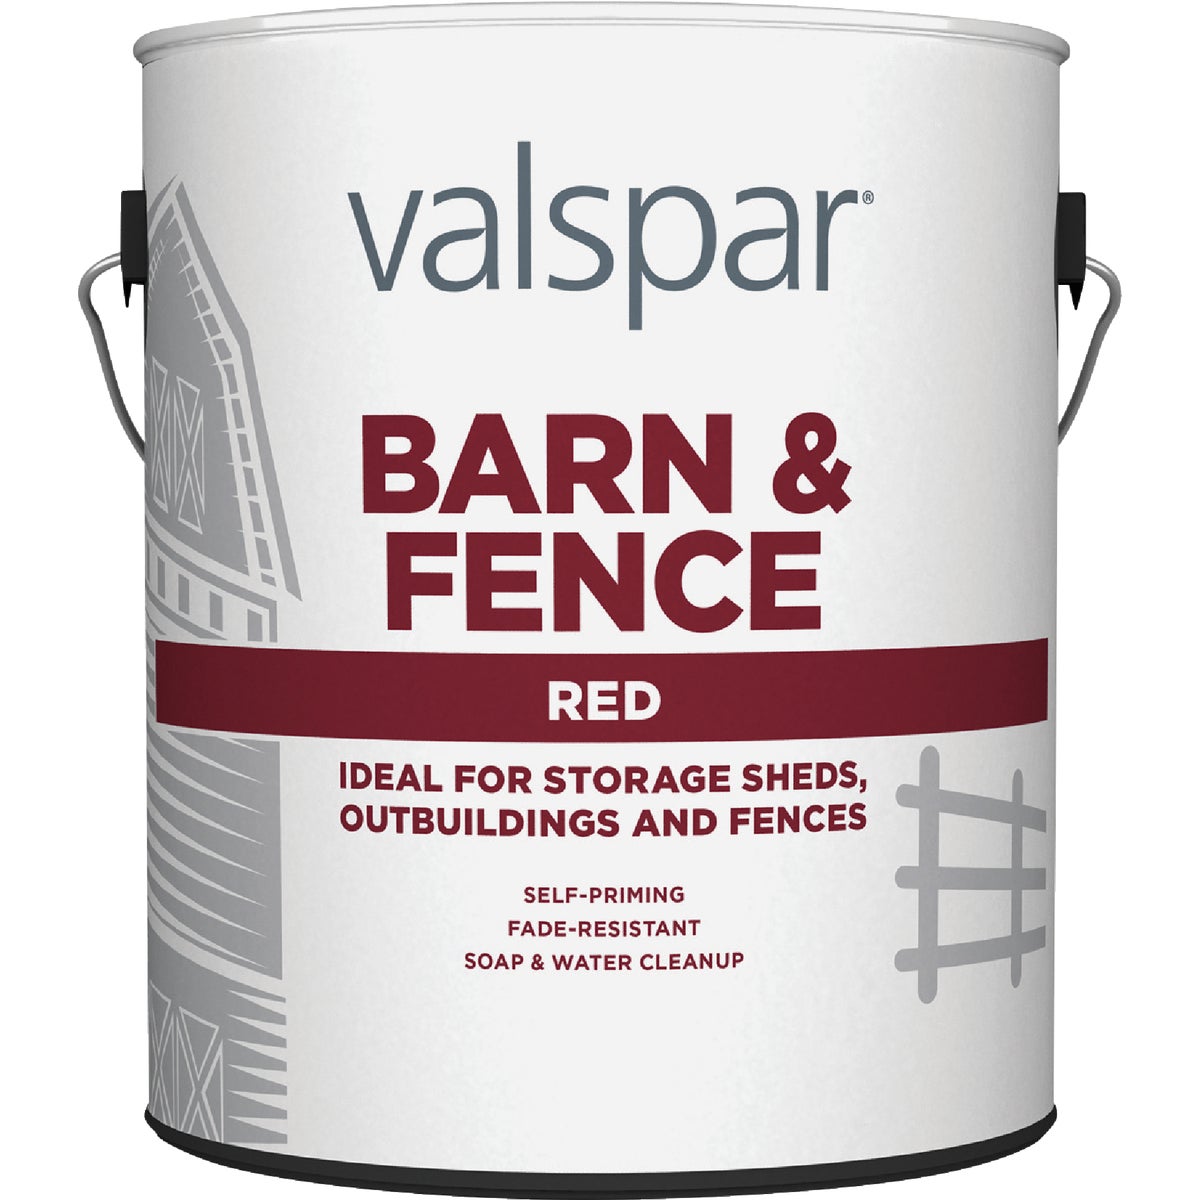 Valspar Latex Paint & Primer In One Flat Barn & Fence Paint, Red, 1 Gal.